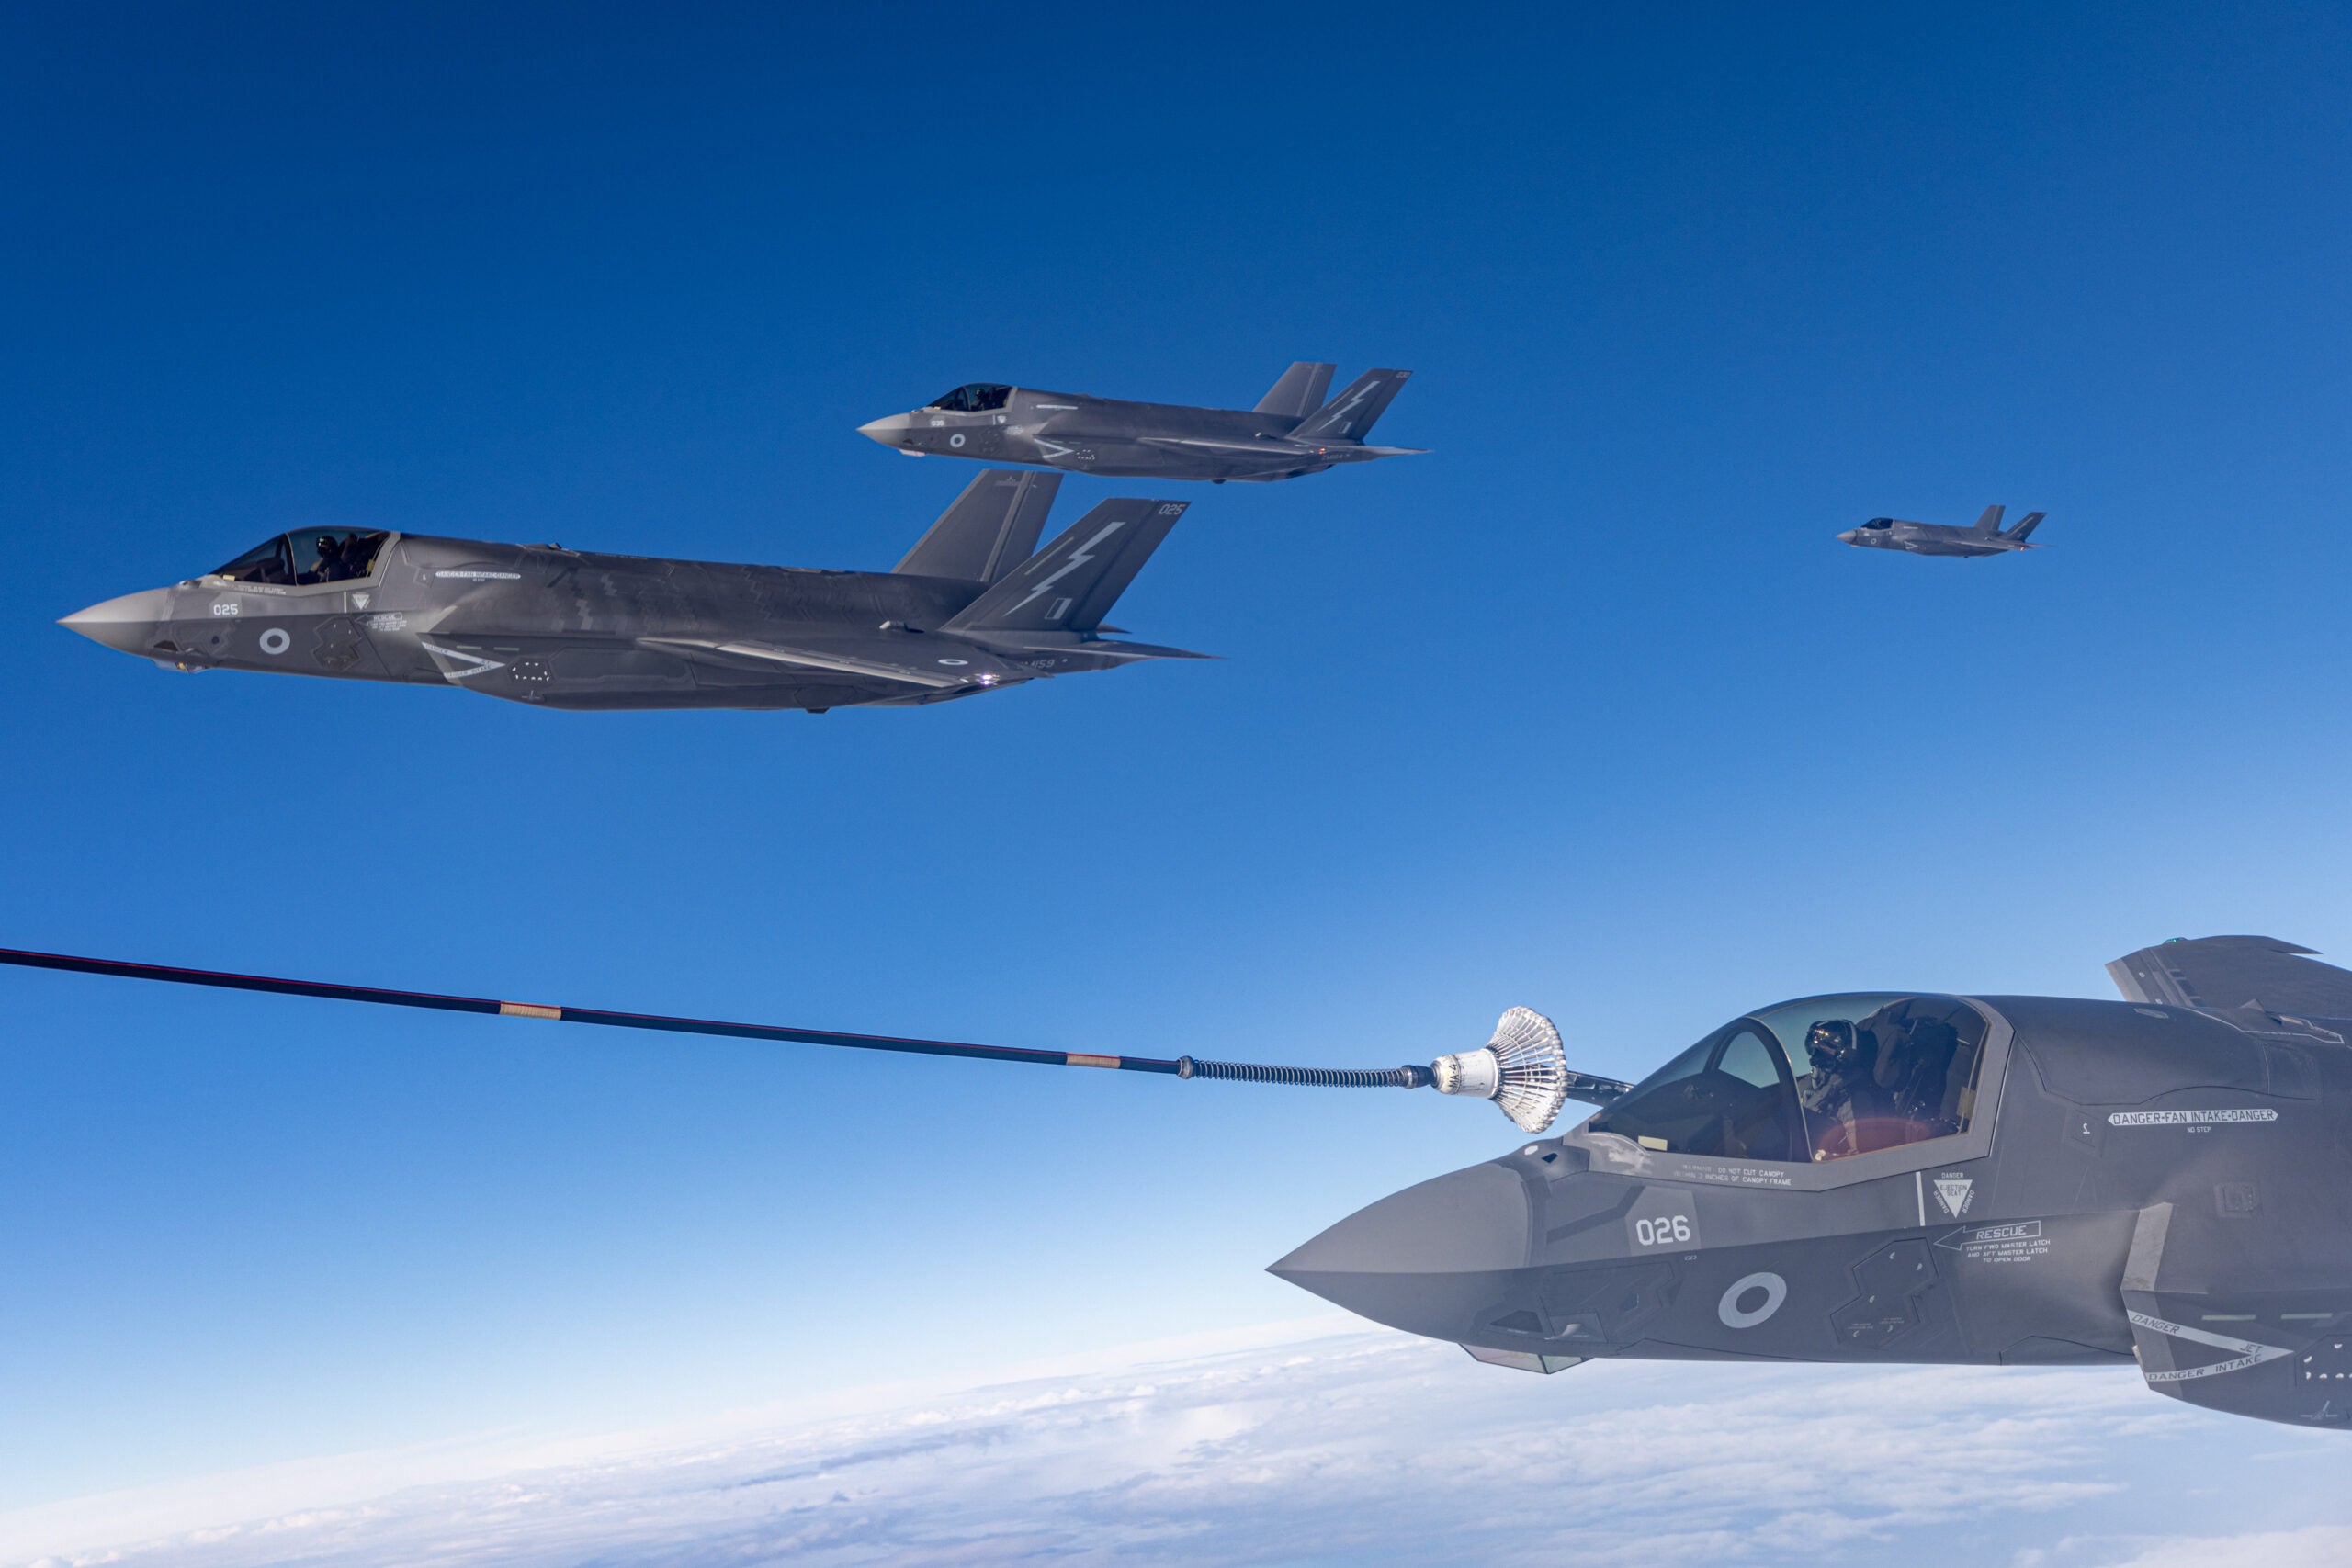 Pictured: RAF F-35B being refuelled by Voyager aircraft over the Baltic Region. These jets are part of Exercise Ruska 23, a Finnish exercise that maintains and develops Finland's air defence.